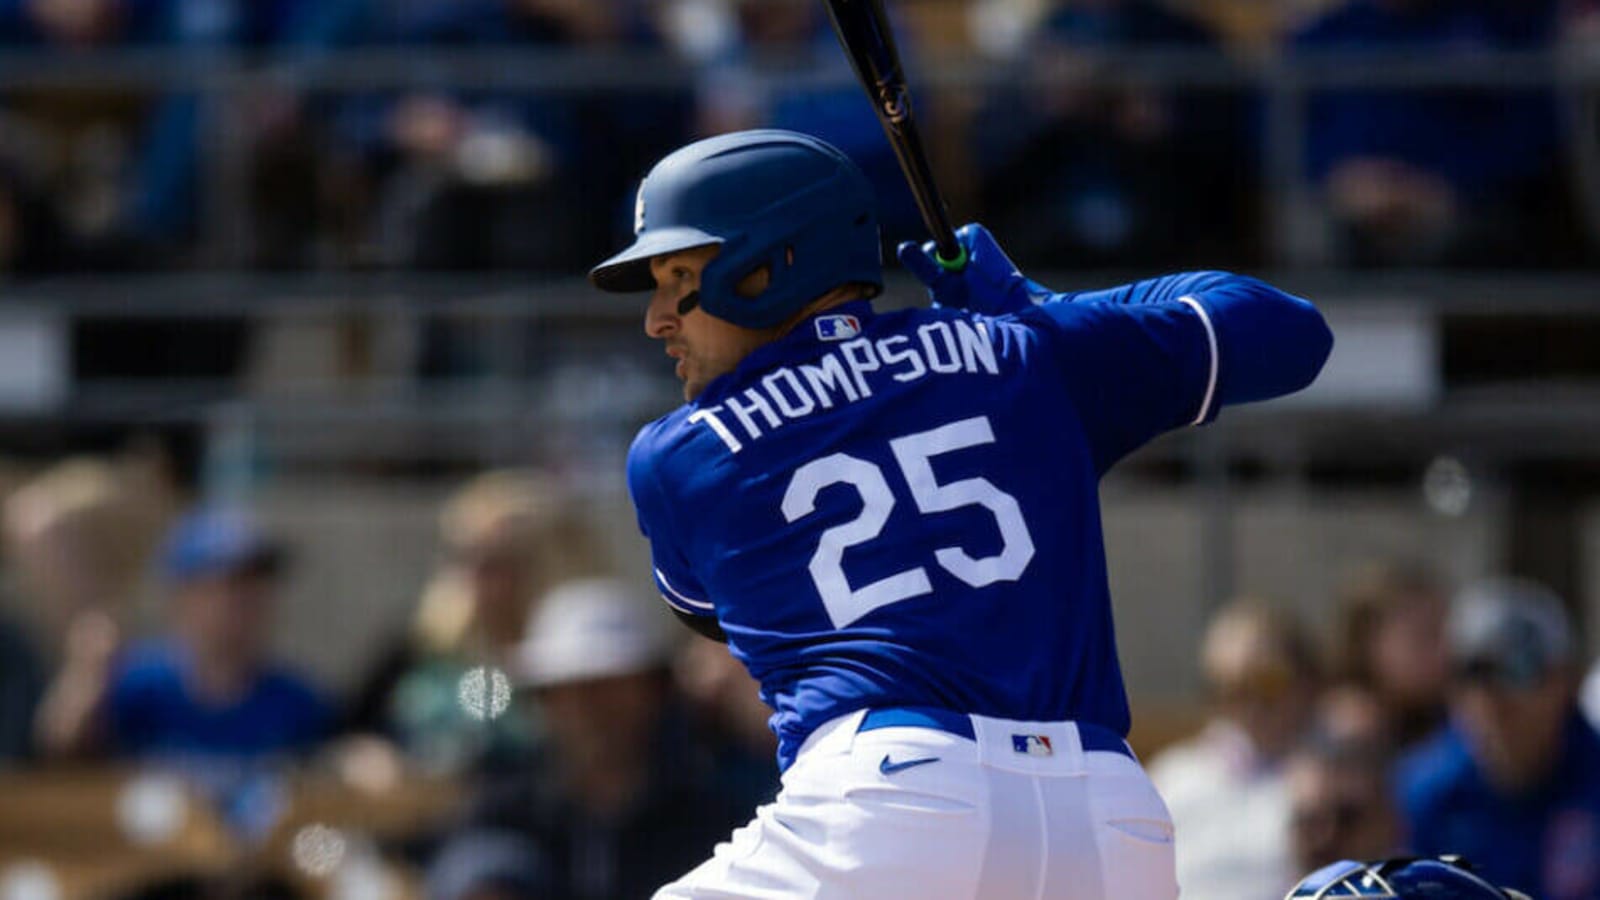 Spring Training Preview: Trayce Thompson Returns To Dodgers Lineup